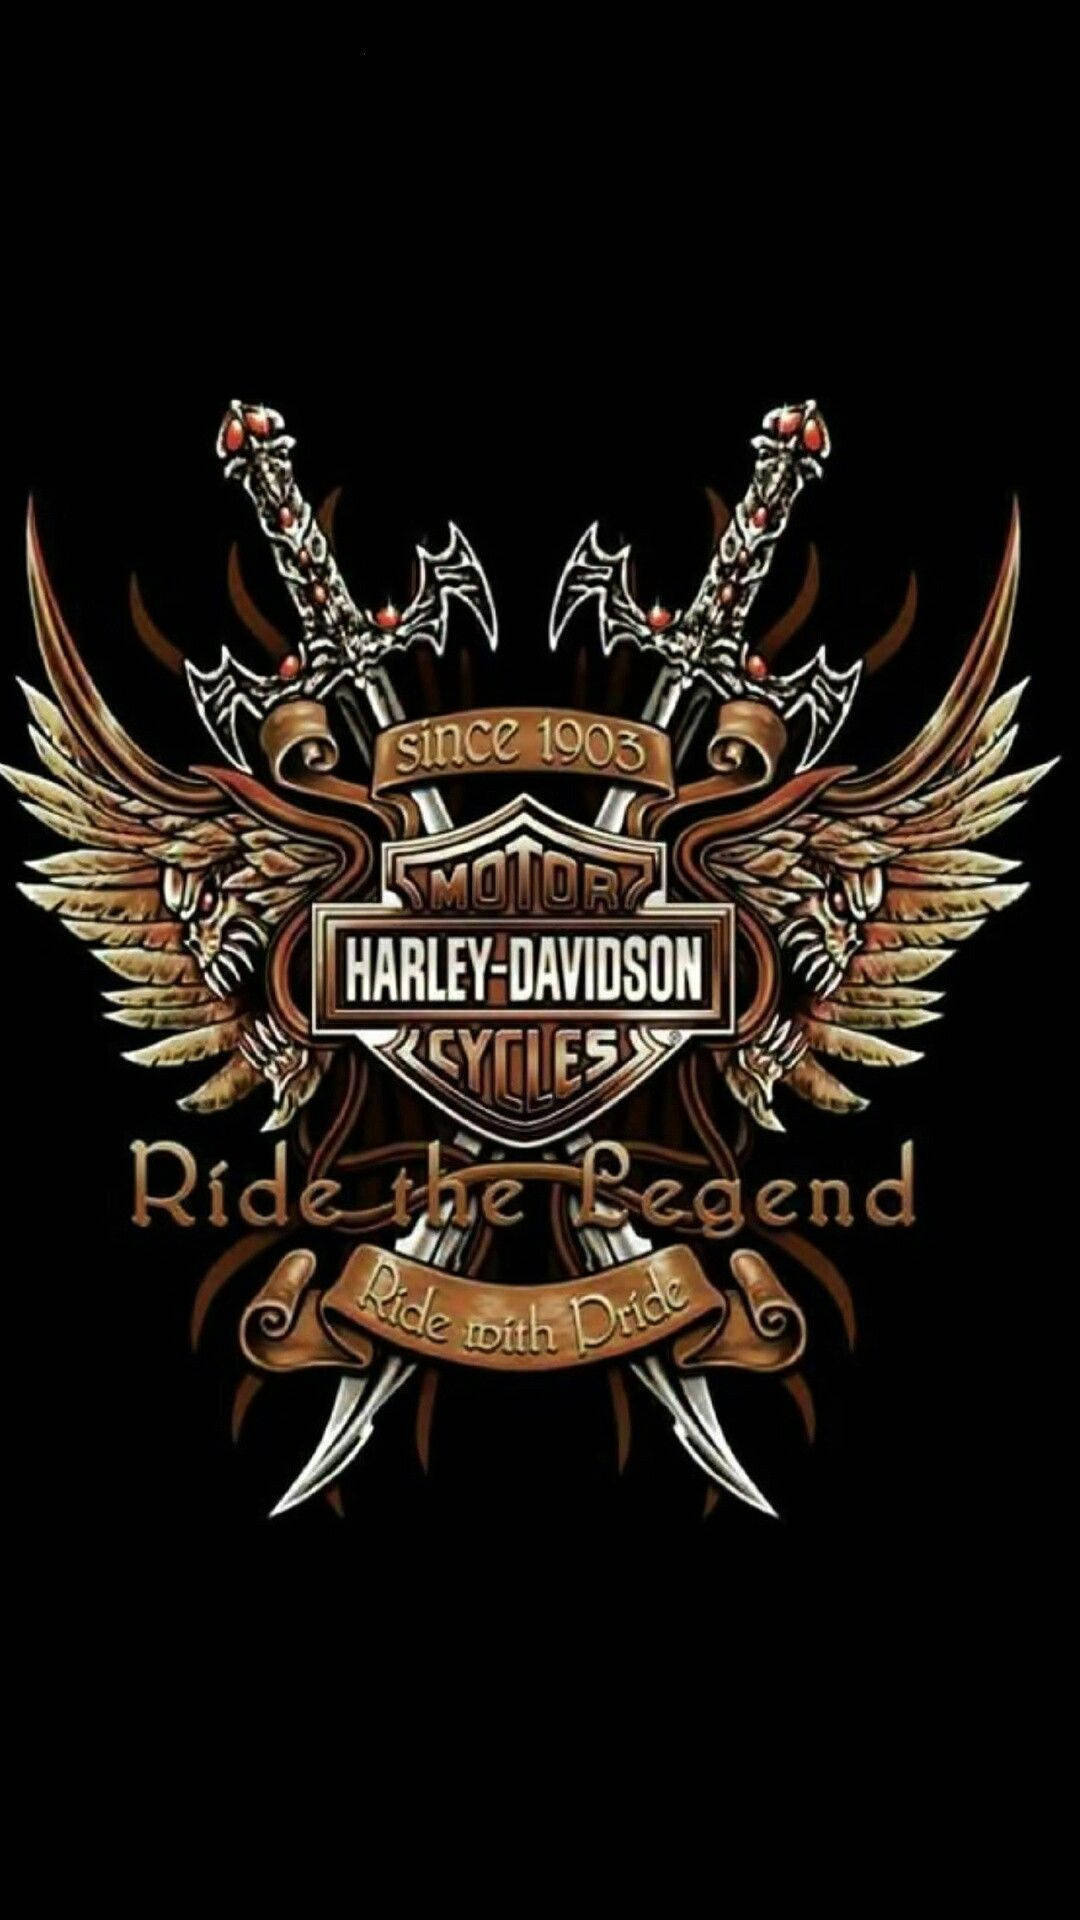 Ride With Pride Harley Davidson Logo Picture